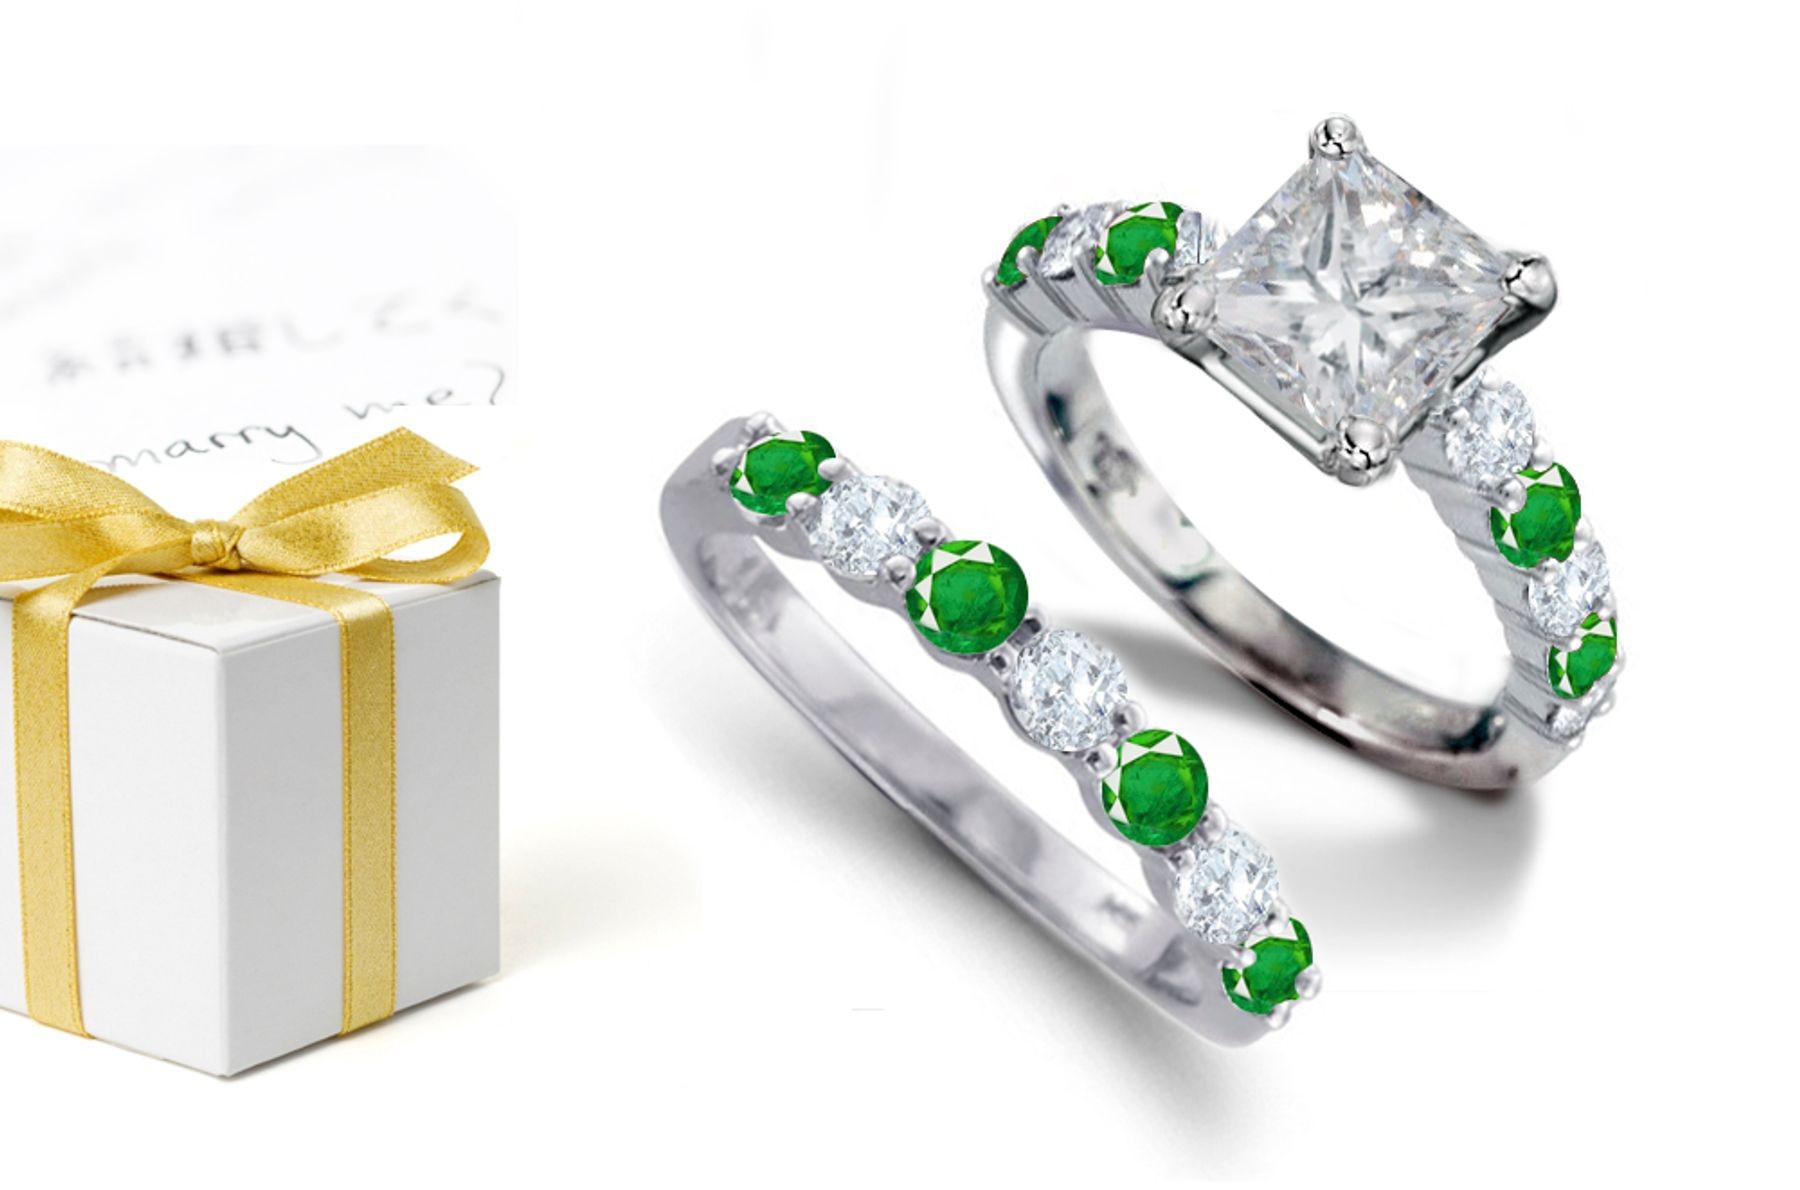 Among Important Additions to Stock: A Princess Cut Diamond in Center & Emerald Ring & Circular Line of Emerald, Diamond Wedding Anniversary Jewelry